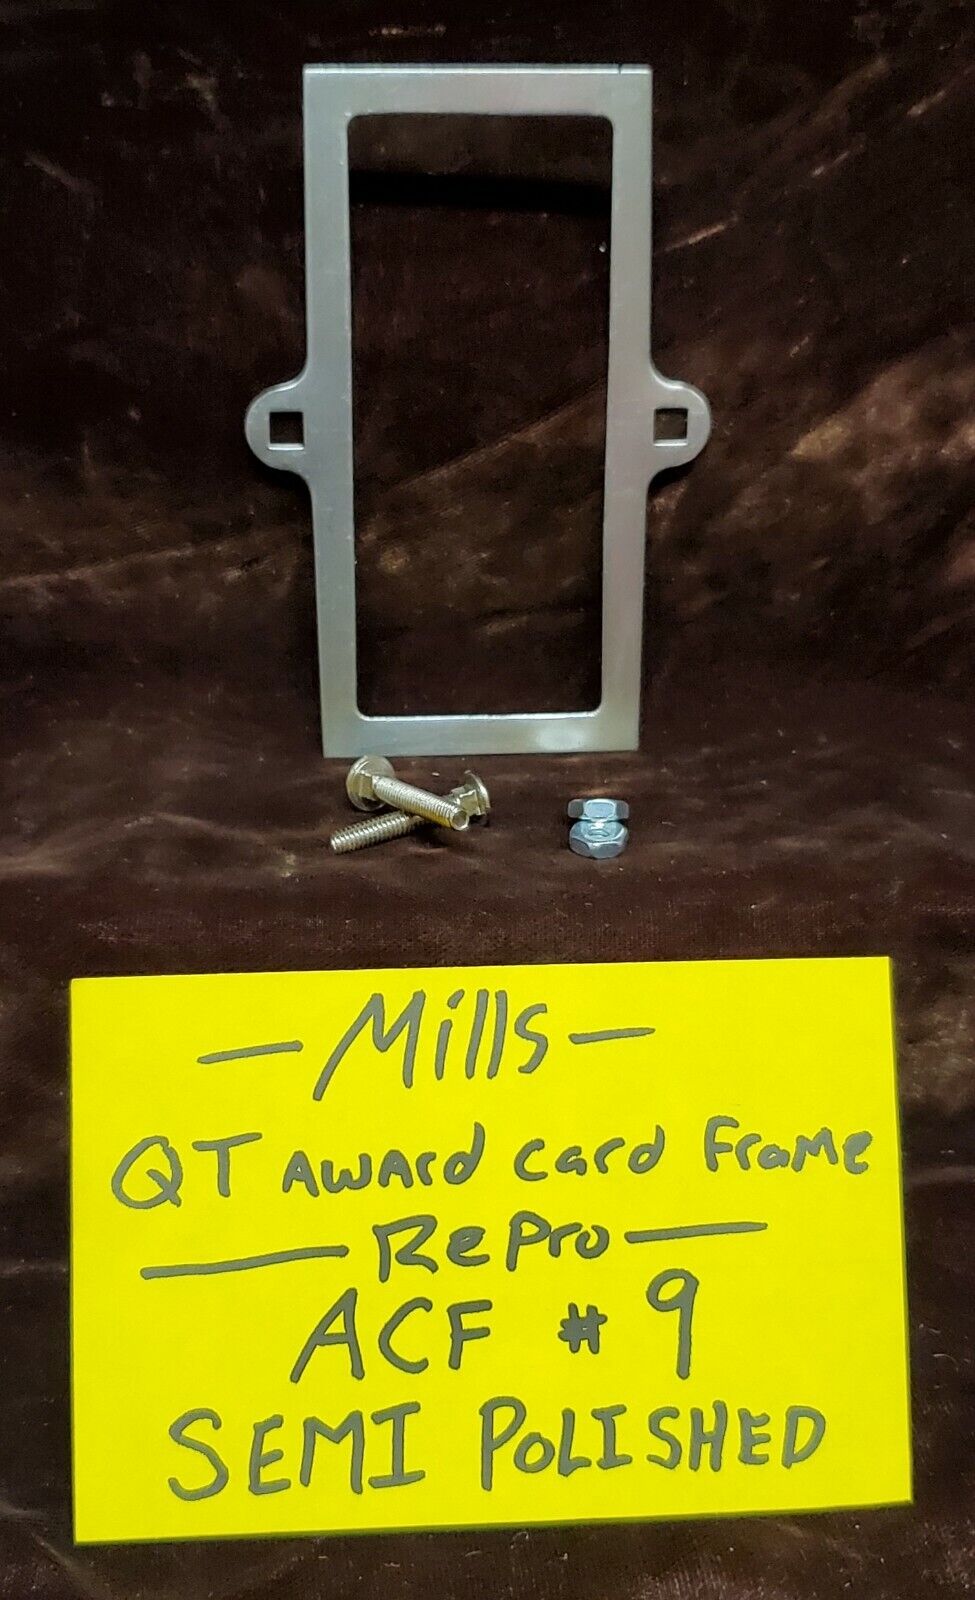 REPLACEMENT MILLS QT AWARD CARD FRAME FOR ANTIQUE SLOT MACHINE #ACF9